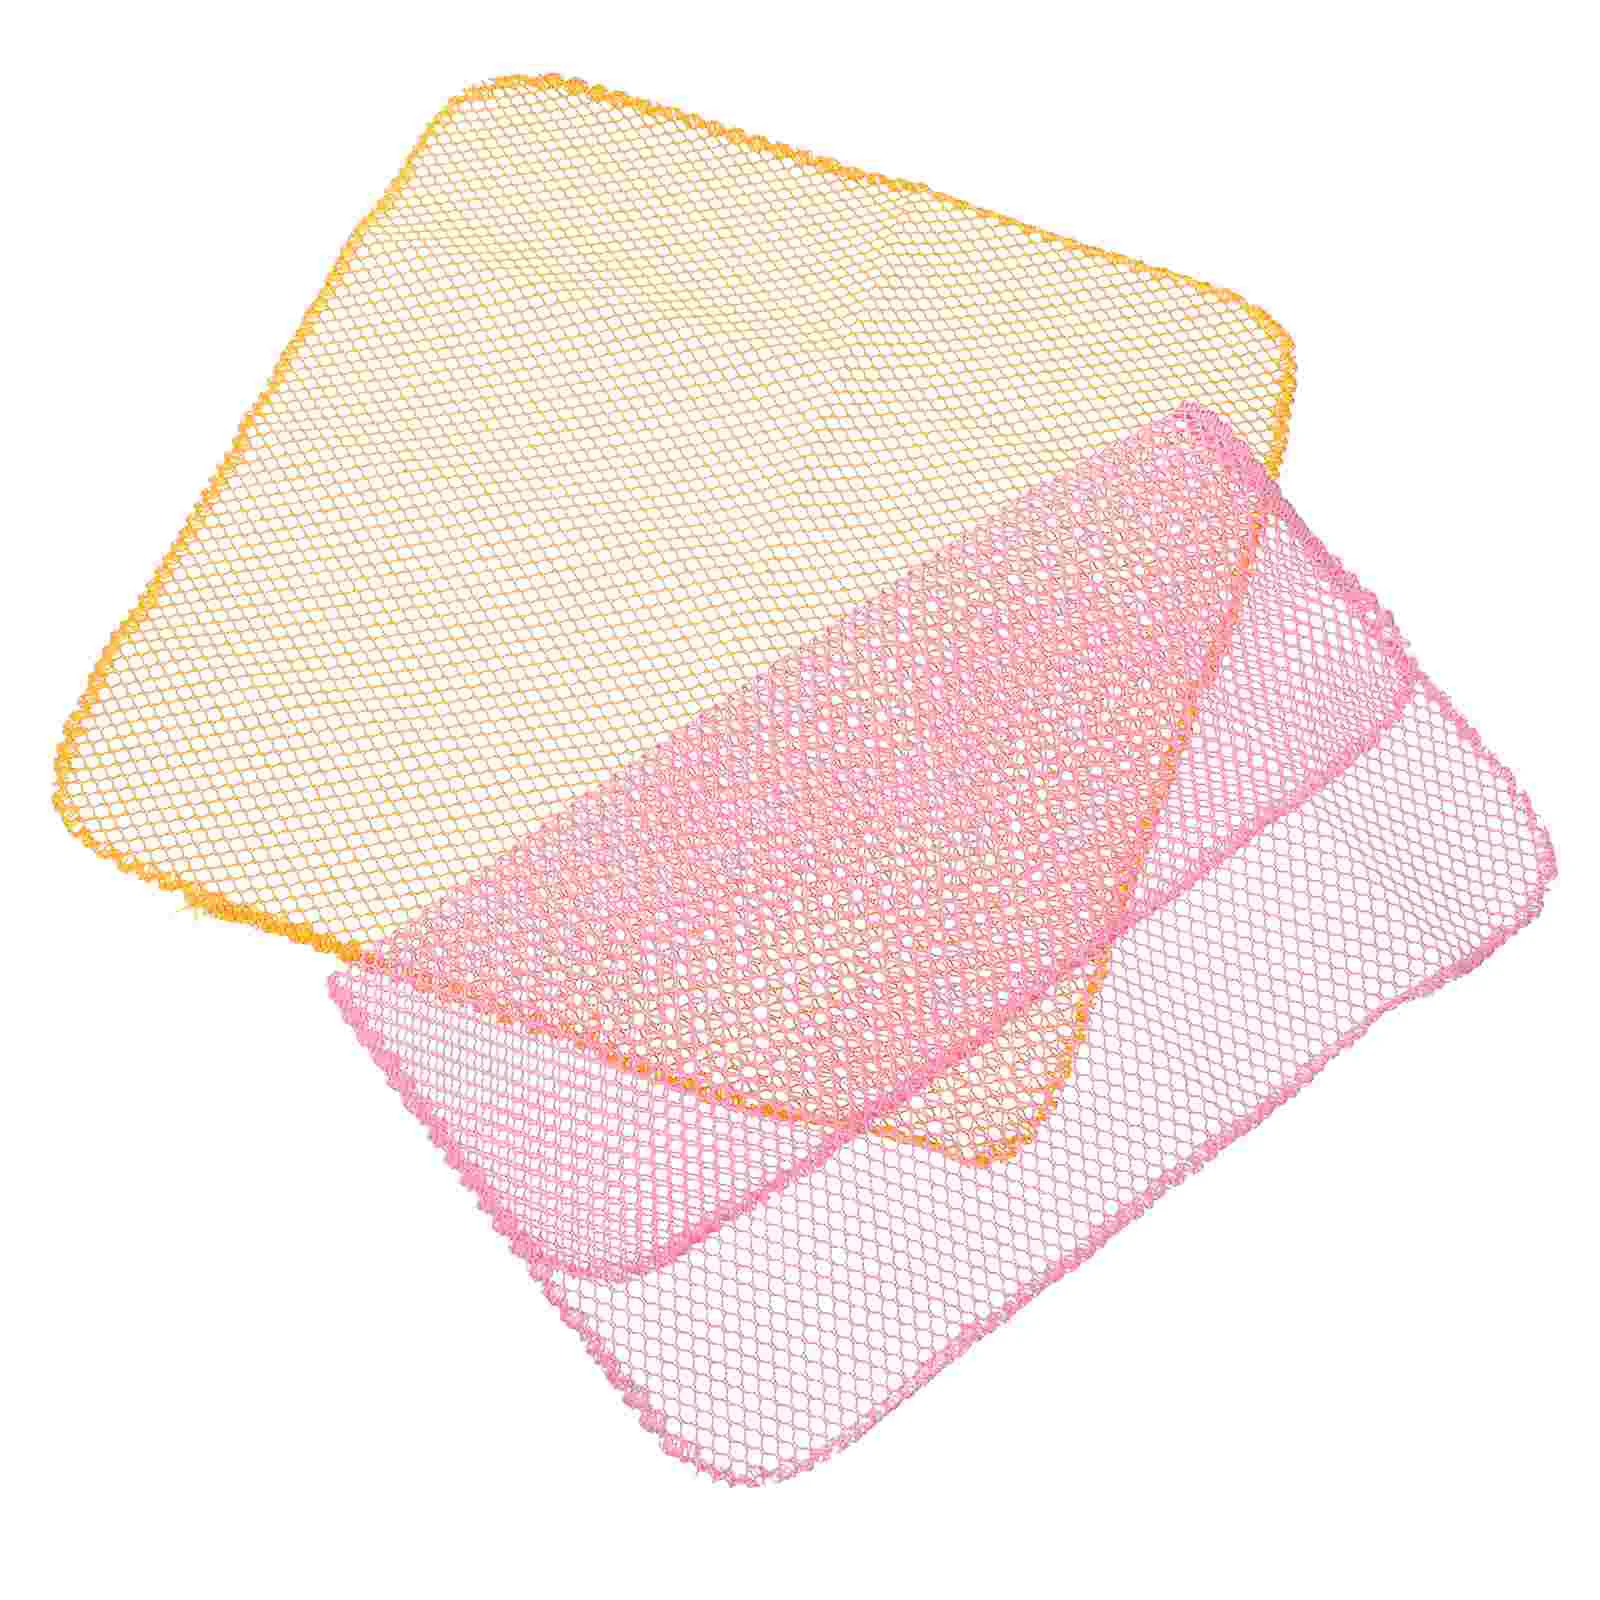 

6pcs Dishwashing Net Cloths Durable Dish Scrubber Cloth Oilproof Quick Dry Kitchen Cleaning Cloths for Kitchen Bathroom Goods